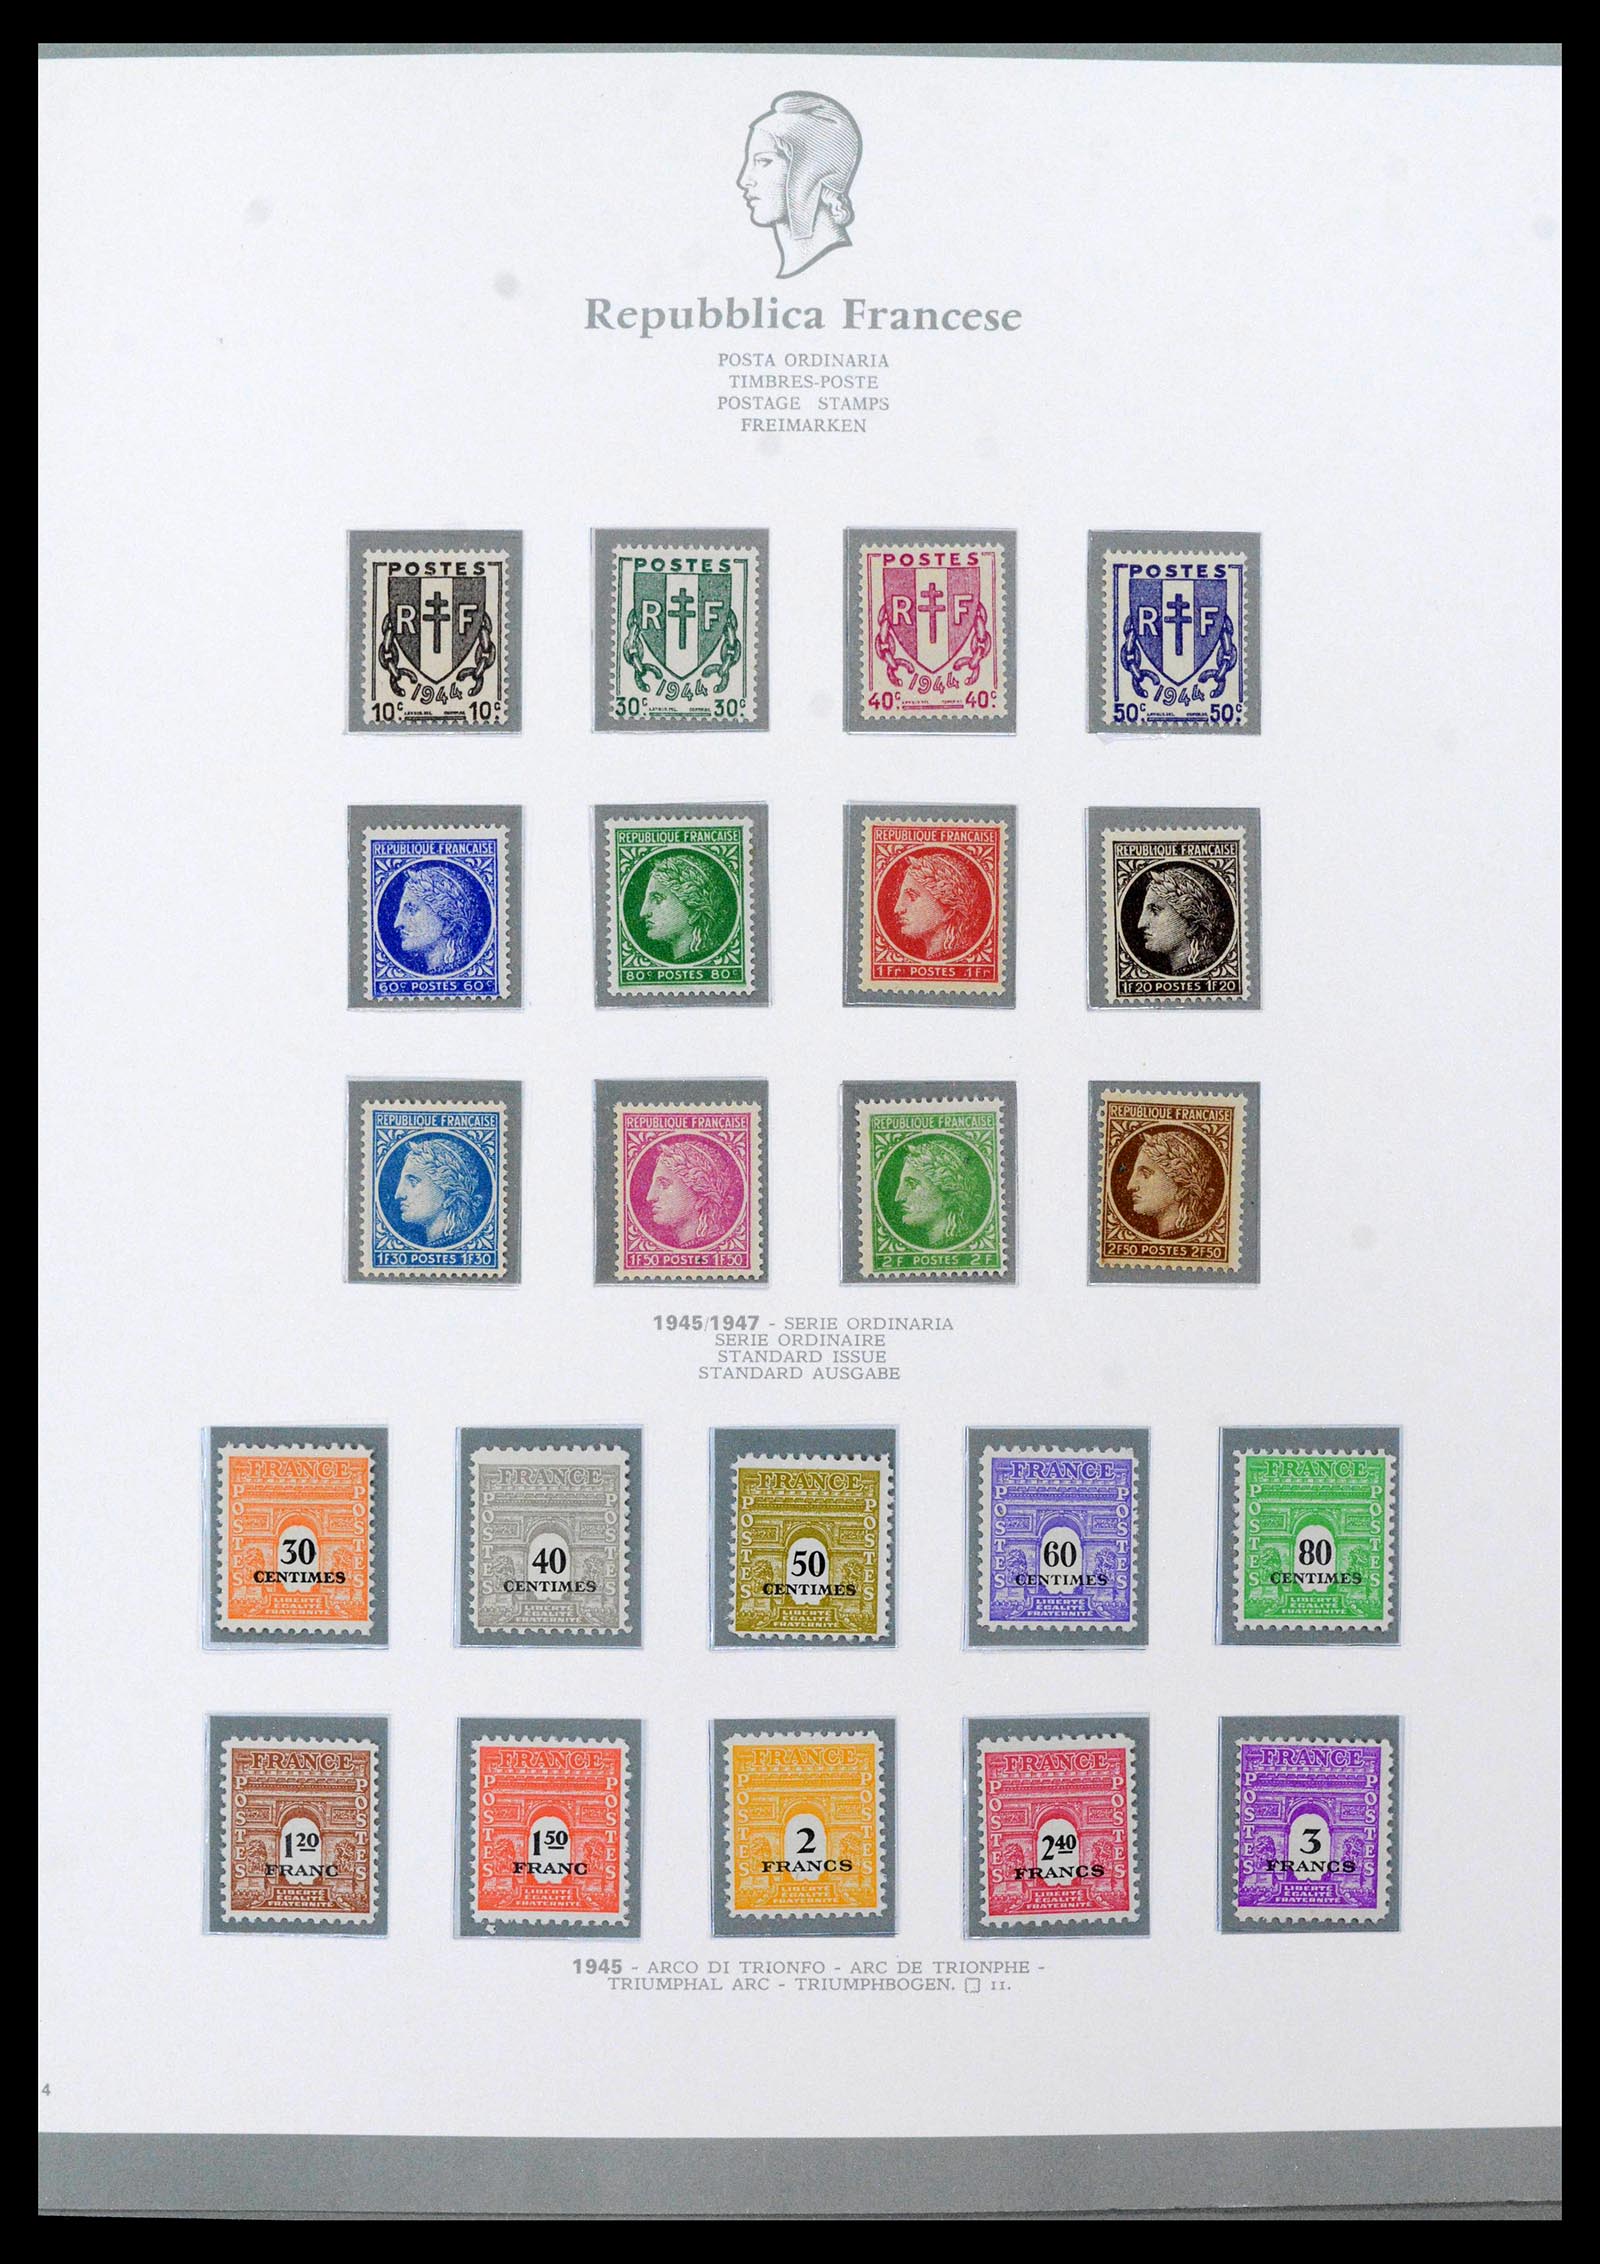 38970 0050 - Stamp collection 38970 France 1849-2015.